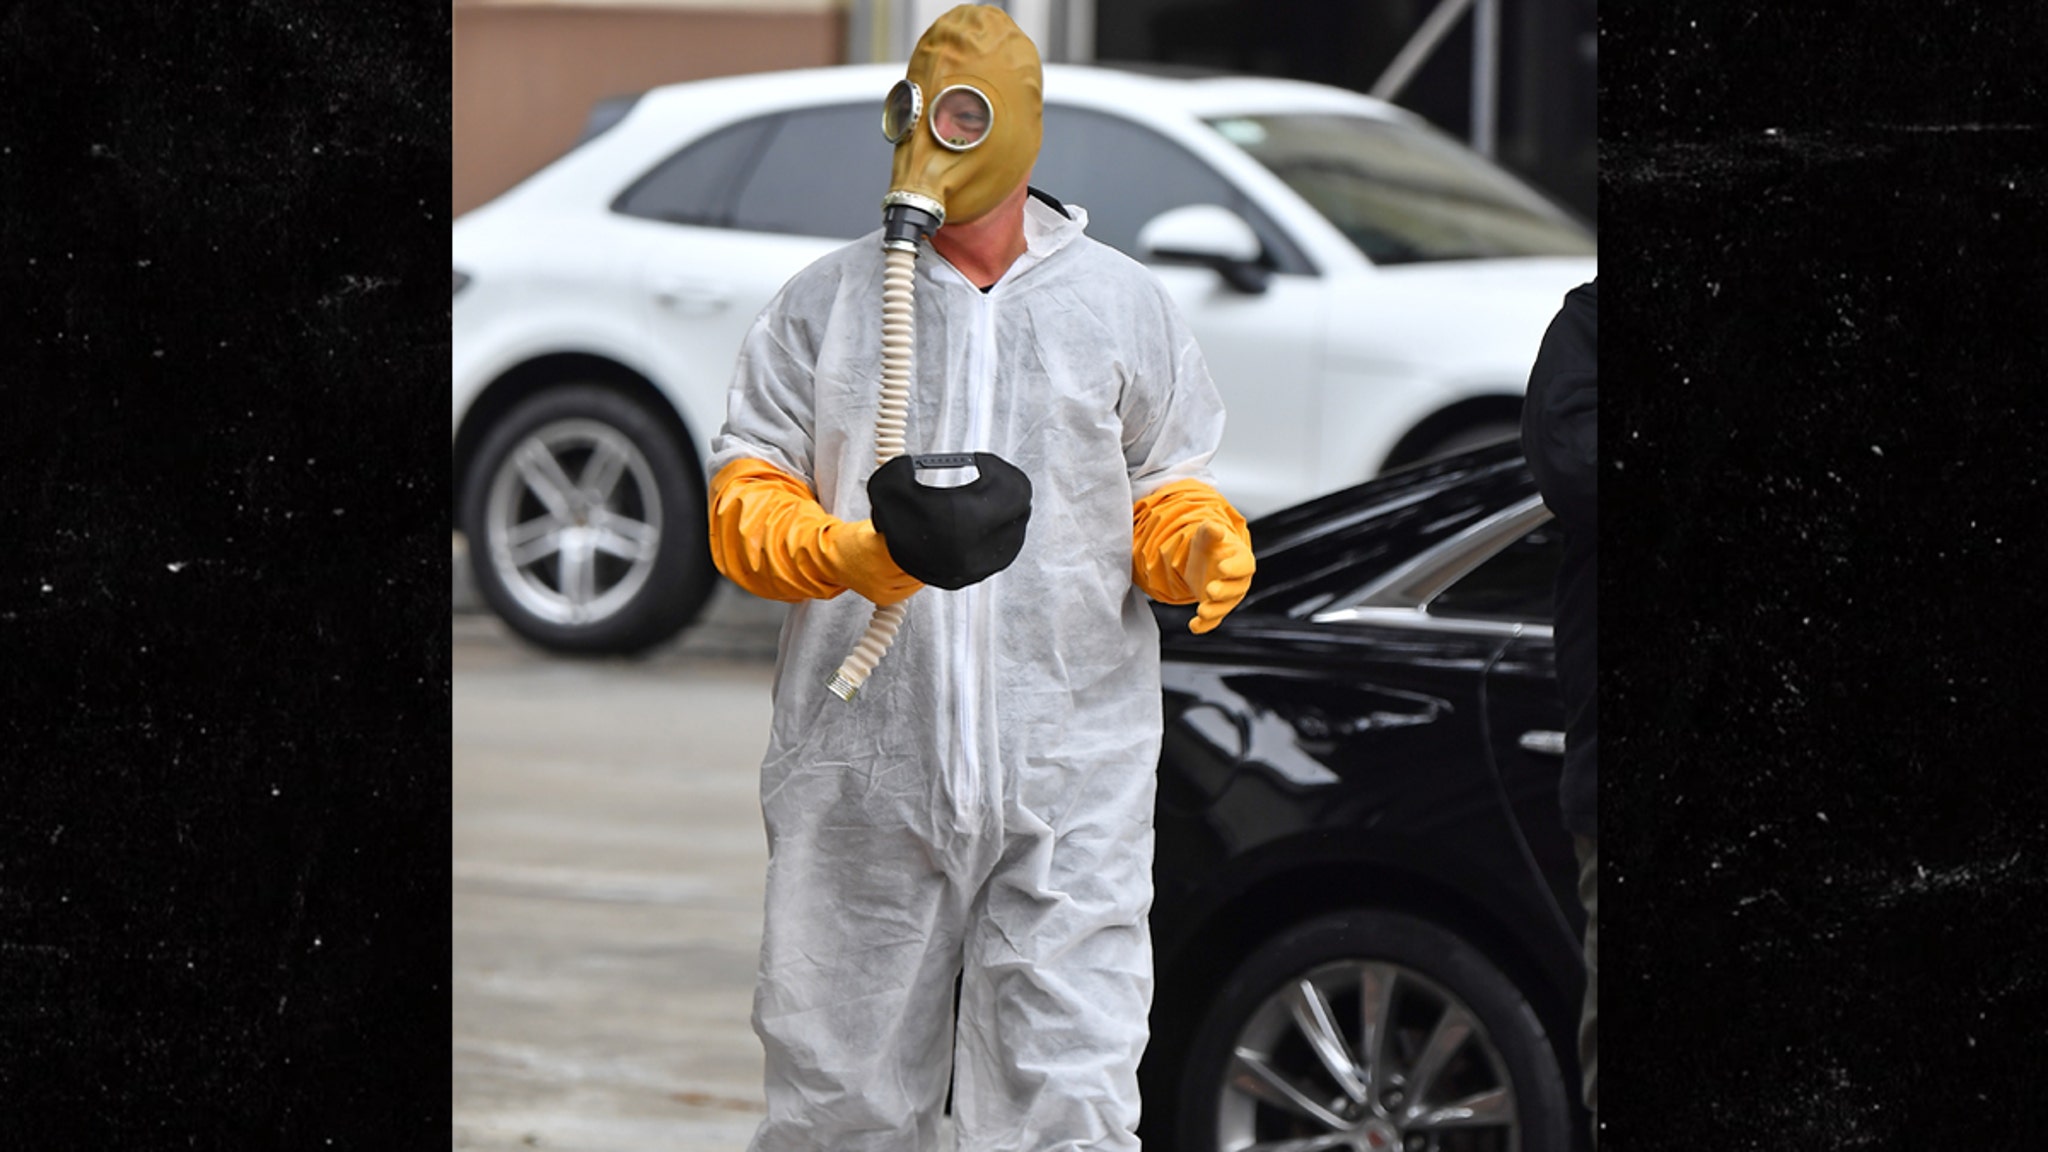 This Celebrity-Favorite Hazmat Suit Won't Protect You From the